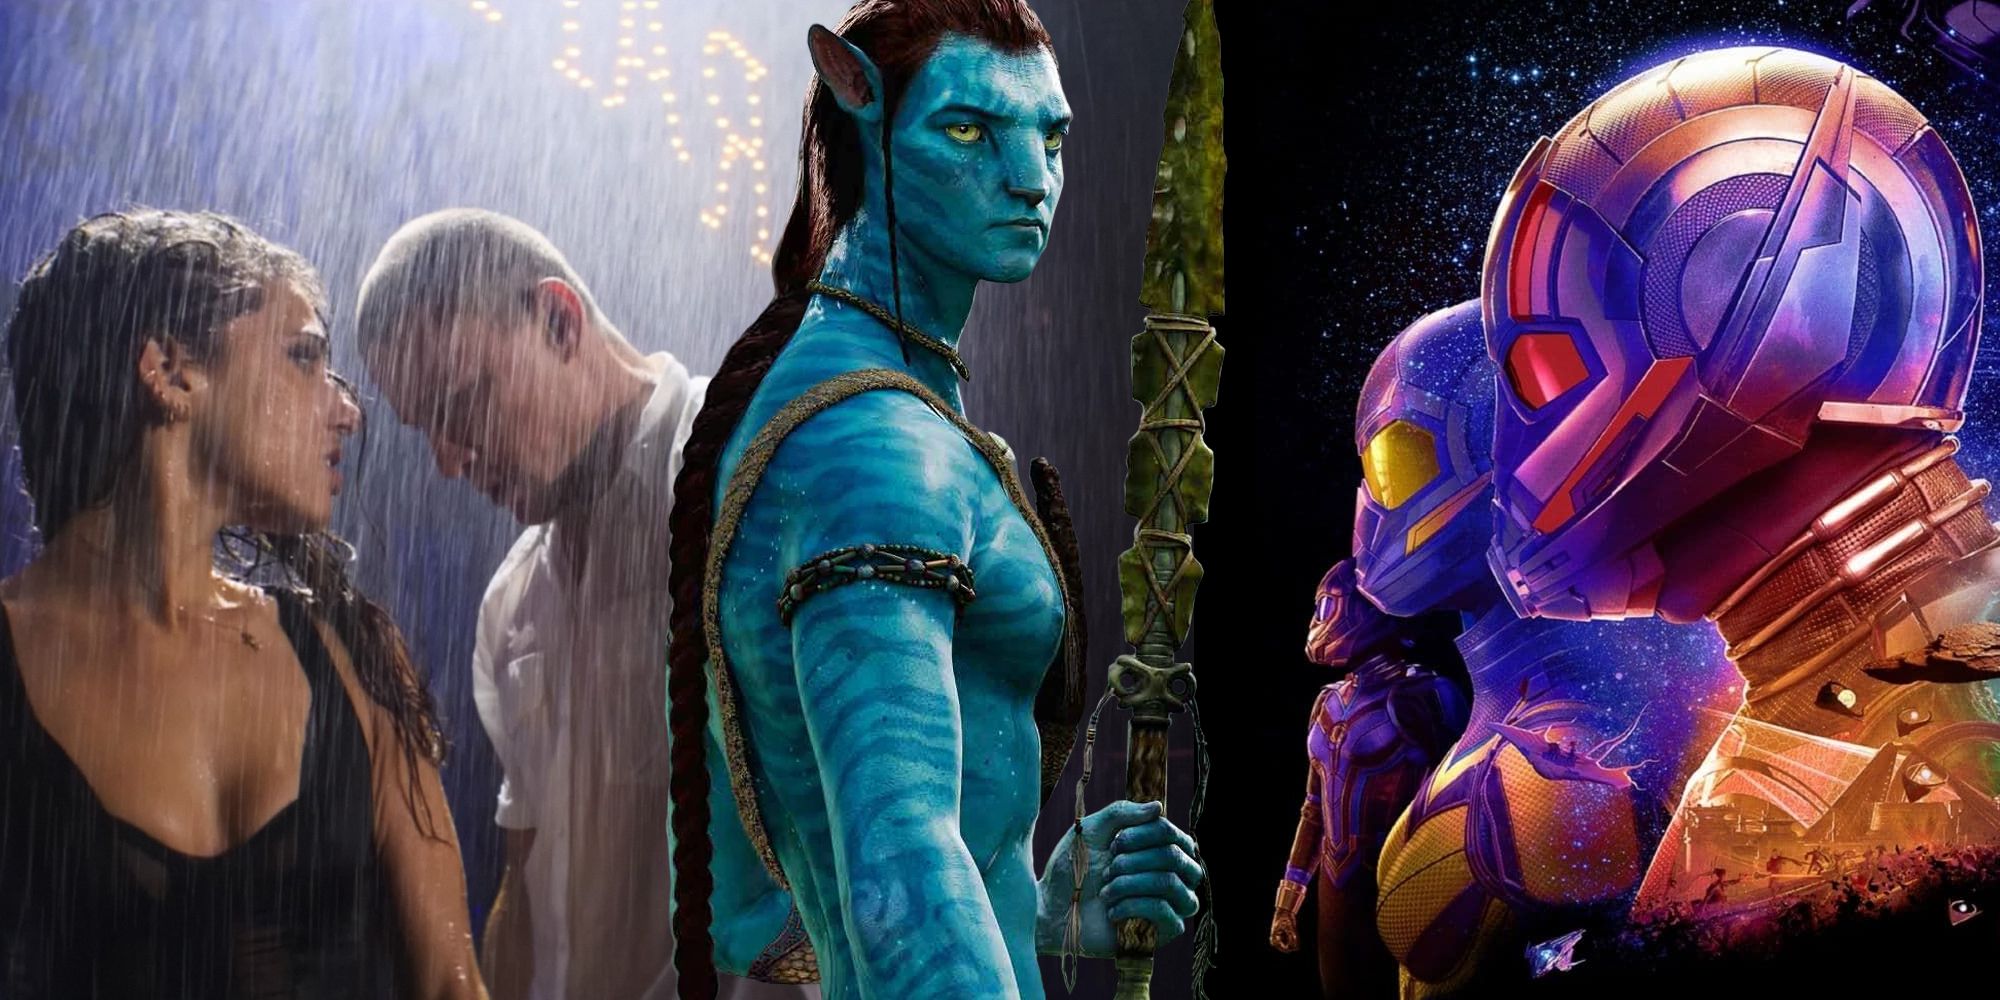 Na'vi is installed in Magic Mike 3 and Ant-Man 3